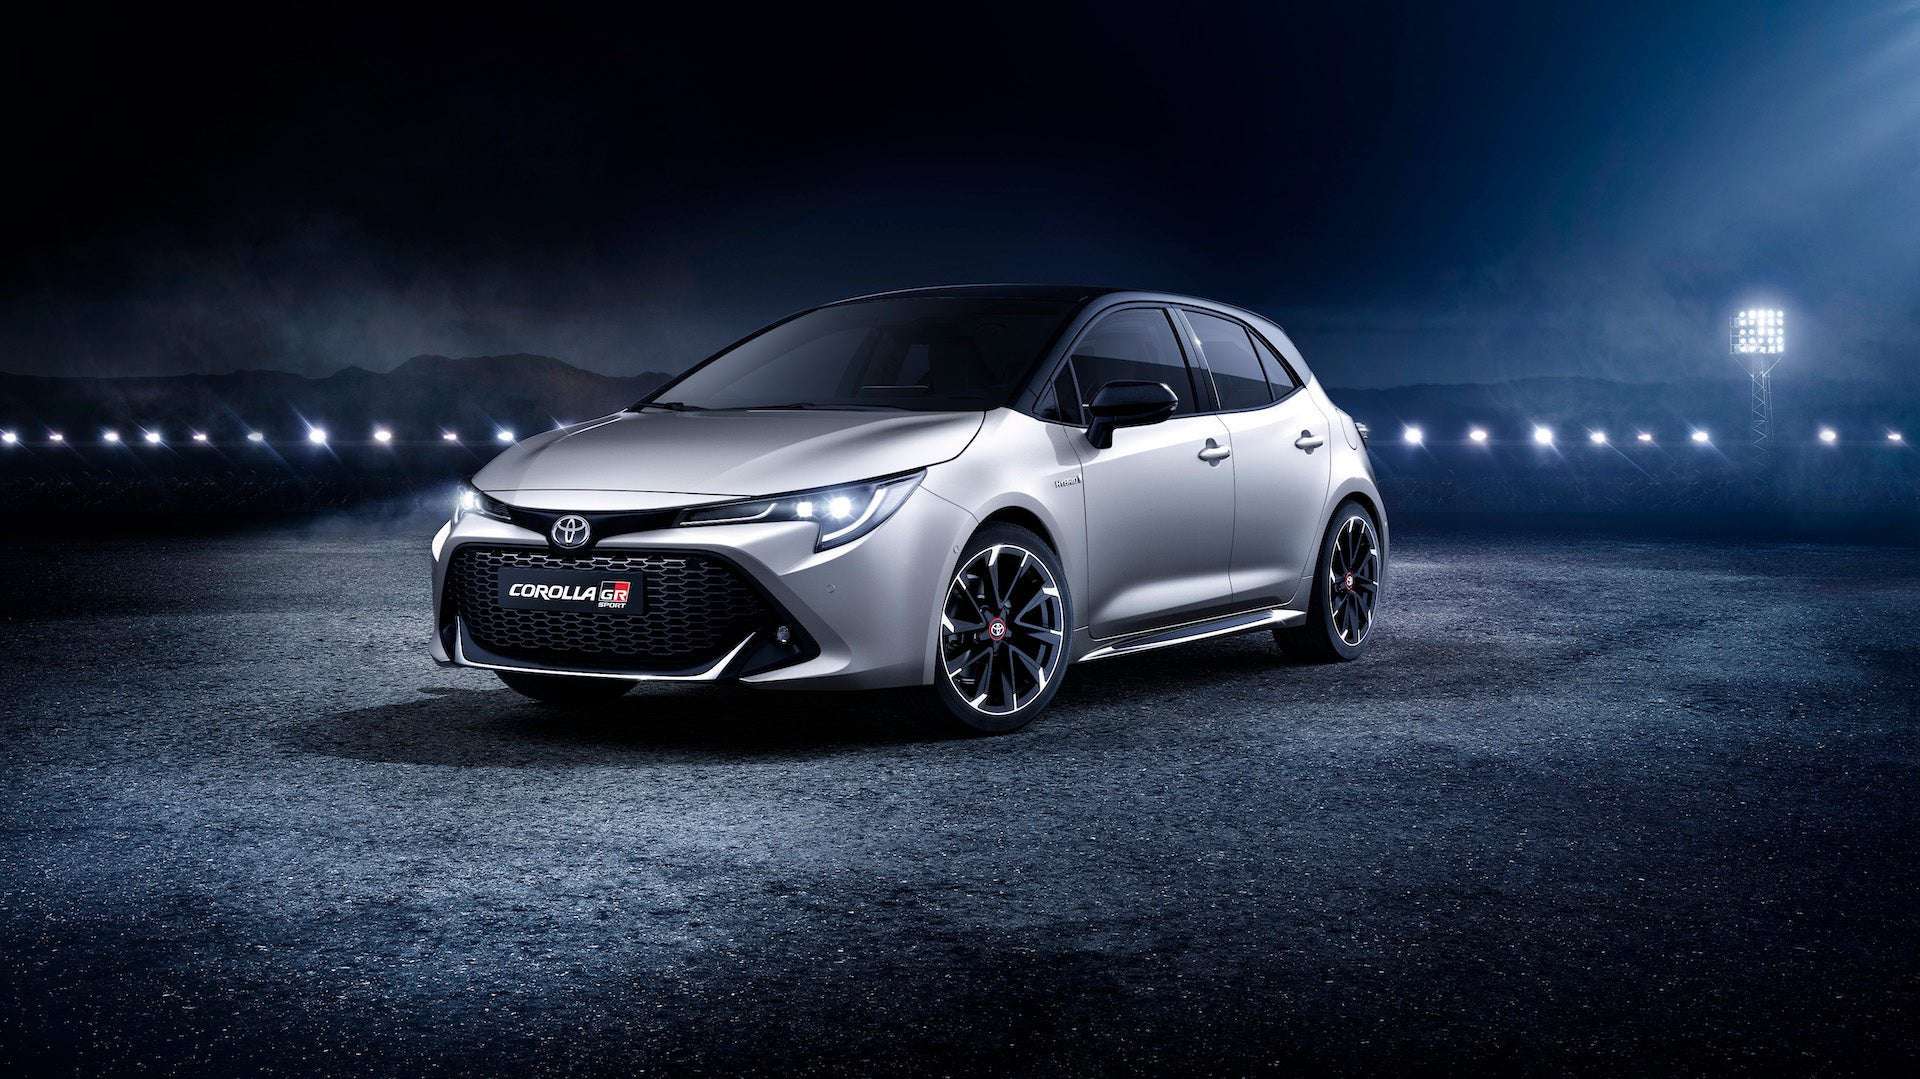 image for US-Bound Toyota Corolla Hot Hatch Could Offer 296 HP, Manual, AWD for Under $37K: Report